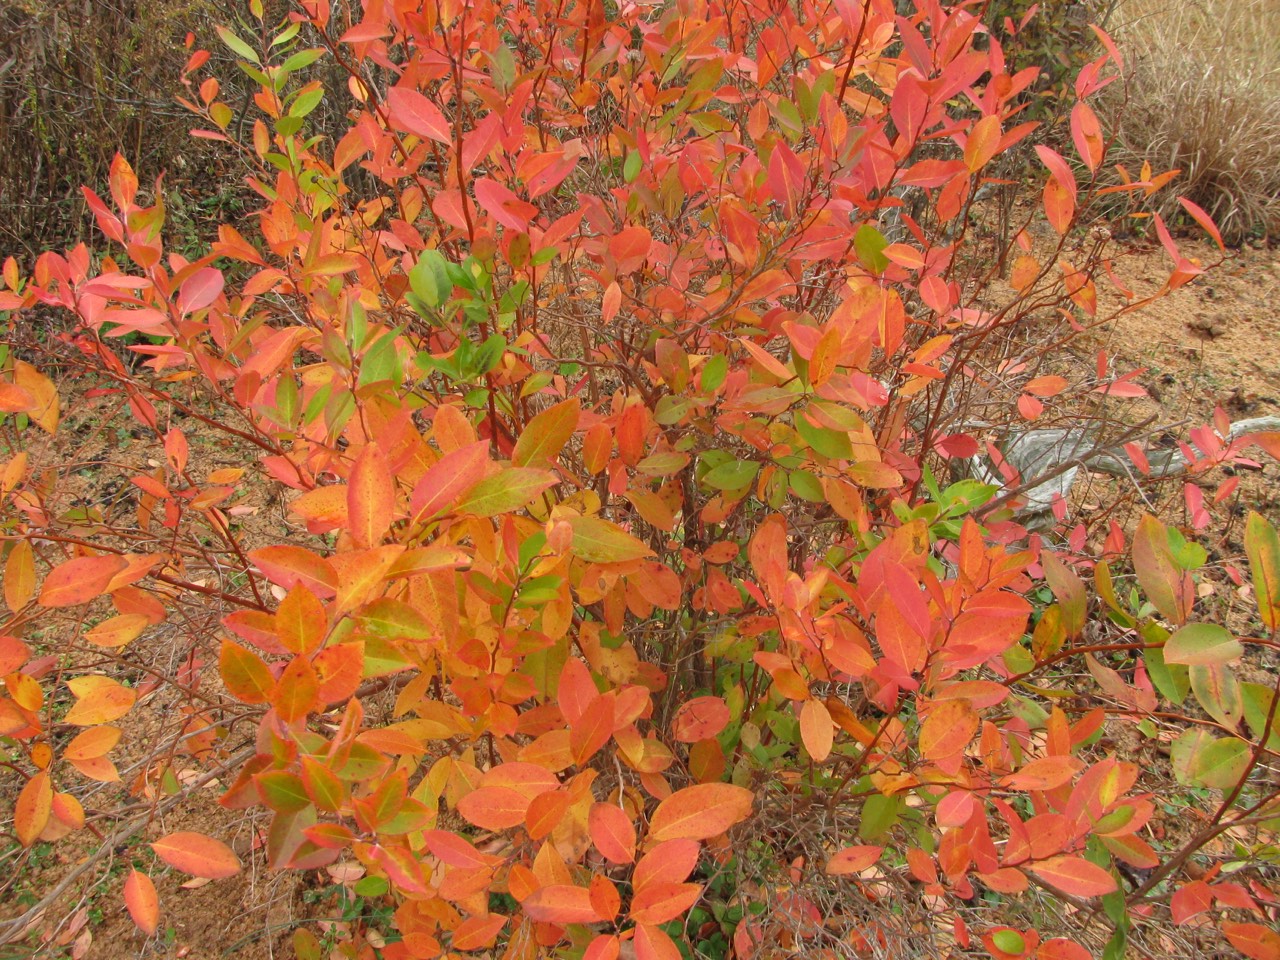 The Scientific Name is Zenobia pulverulenta. You will likely hear them called Zenobia, Honey-cups, Honeycup, . This picture shows the Spectacular late Fall/early Winter leaf color of Zenobia pulverulenta